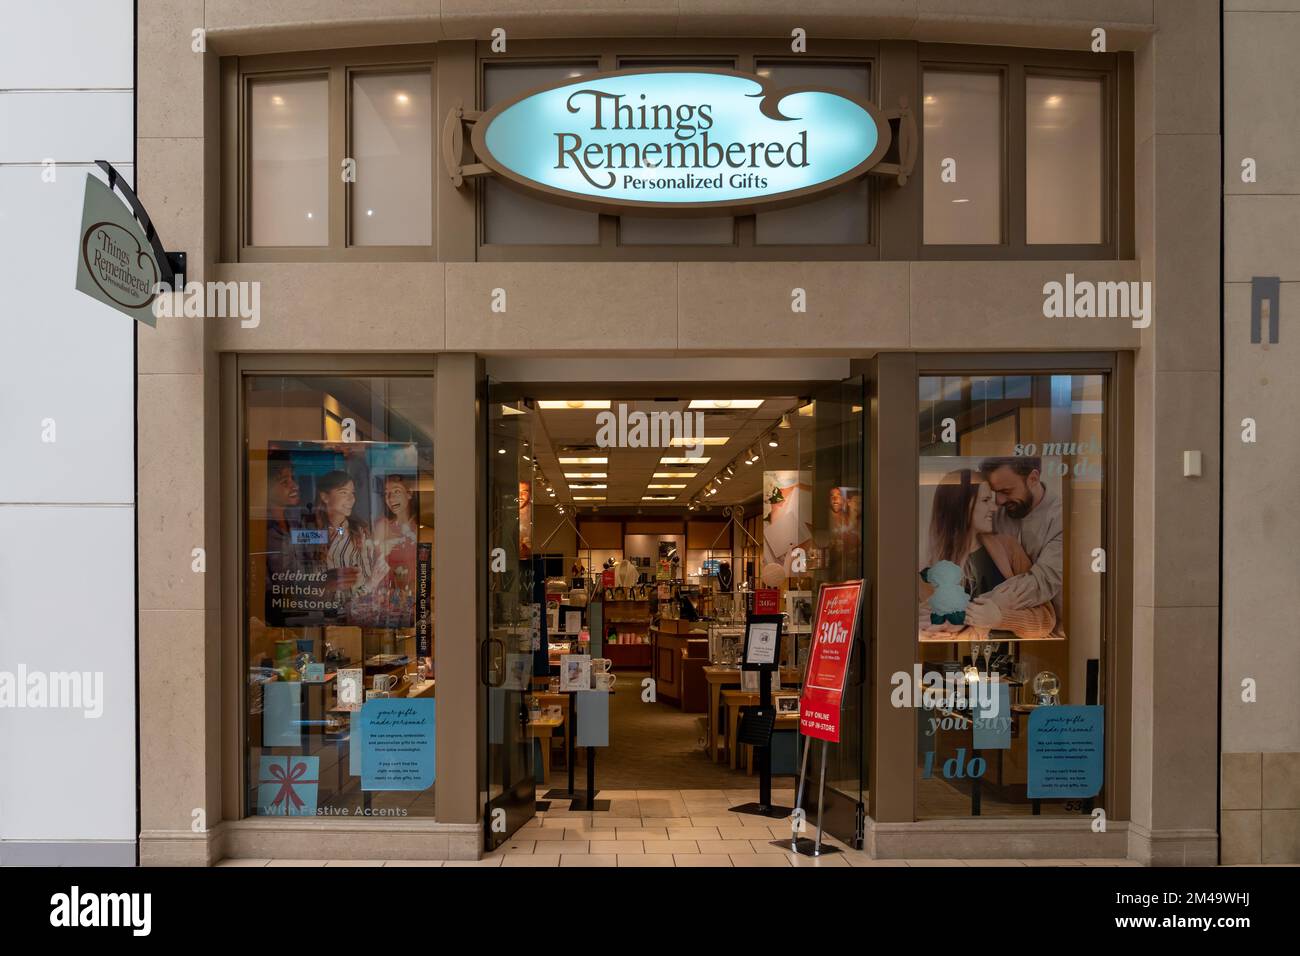 Houston, Texas, USA - March 6, 2022: A Things Remembered store in a mall in Houston, Texas, USA. Stock Photo